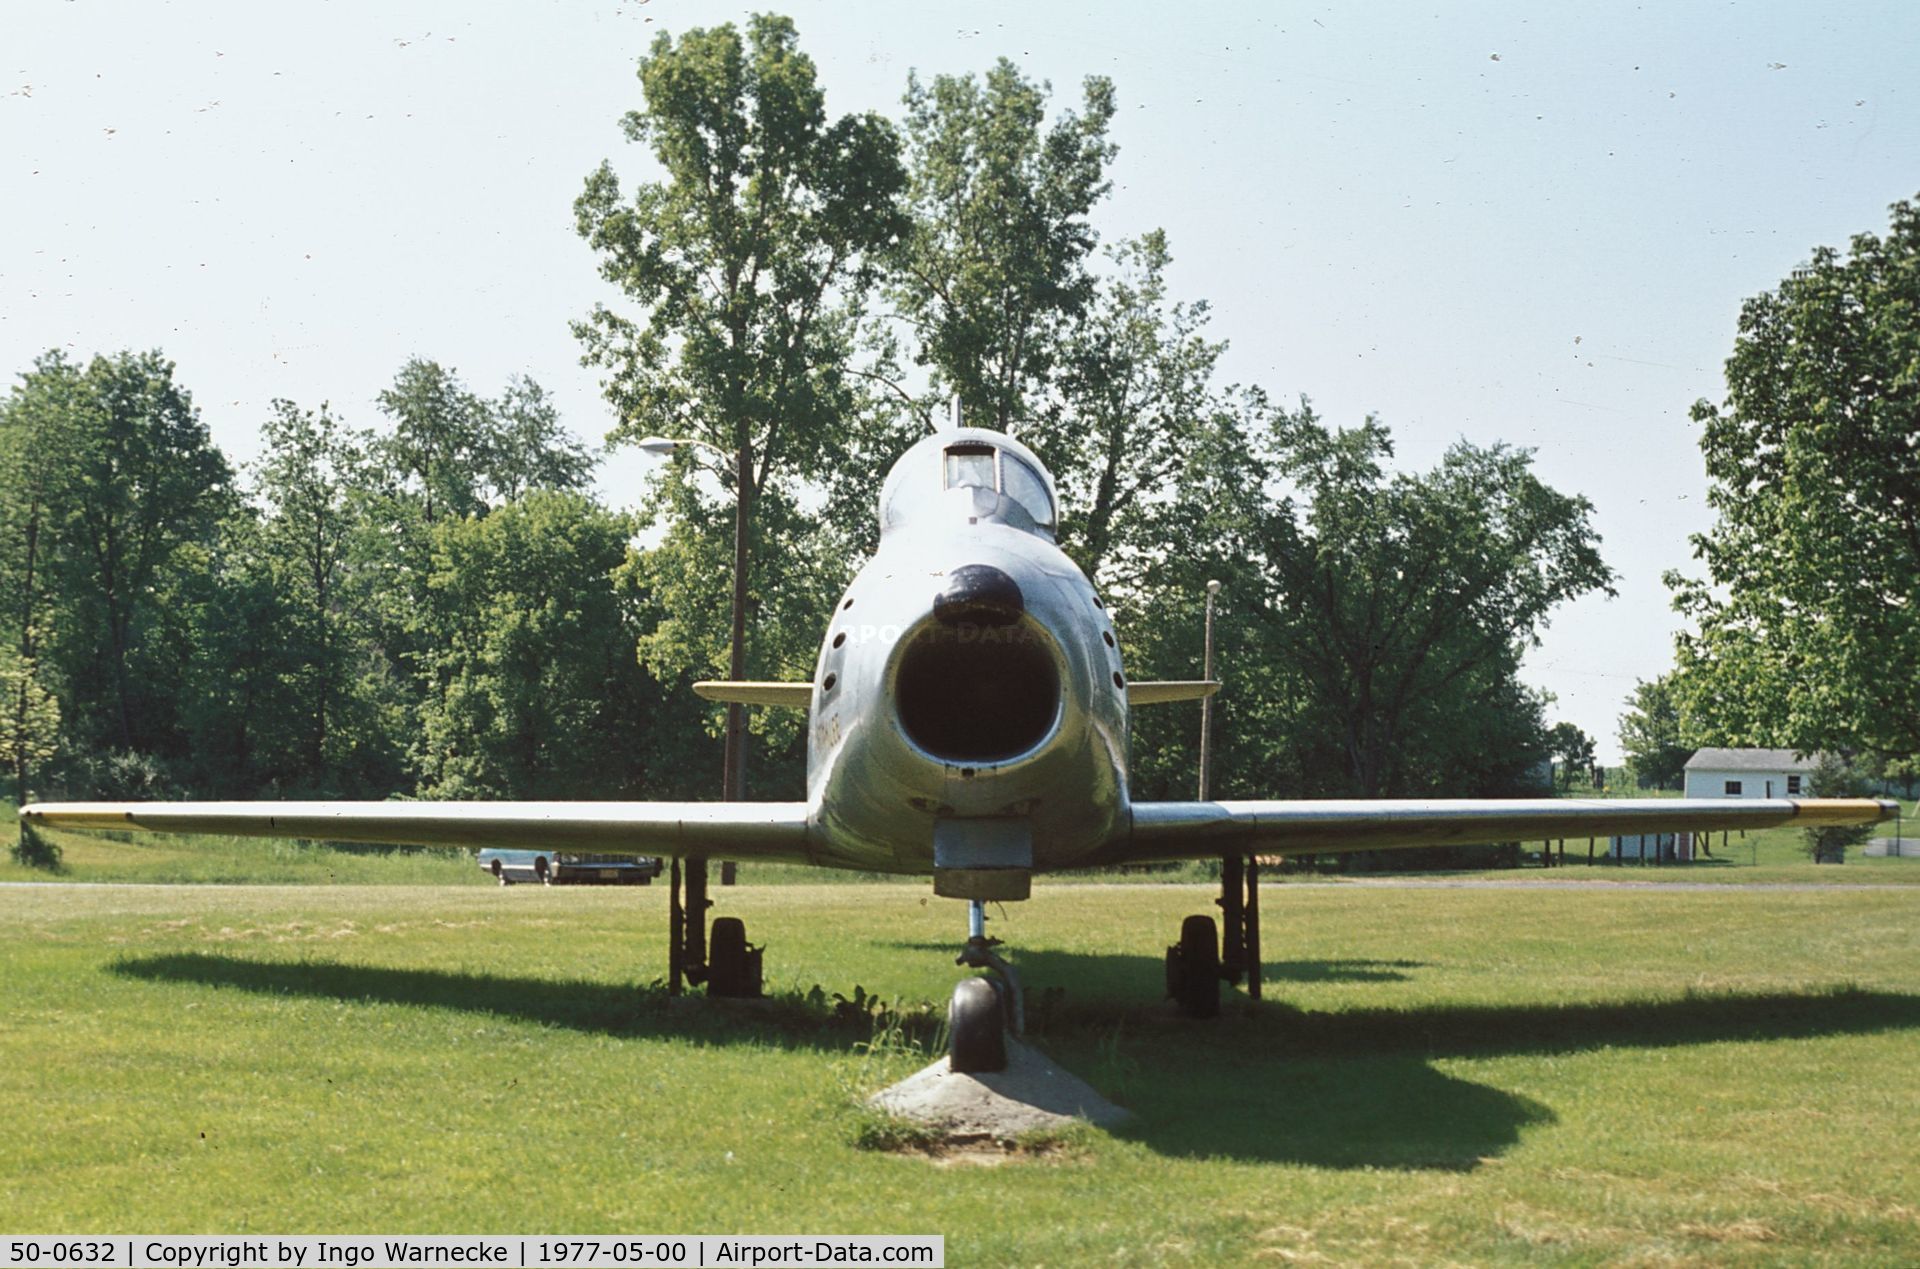 50-0632, North American F-86-E-1-NA C/N unknown_50-0632, North American F-86E-1-NA Sabre, displayed as FU-682 at the Indianapolis VFW post